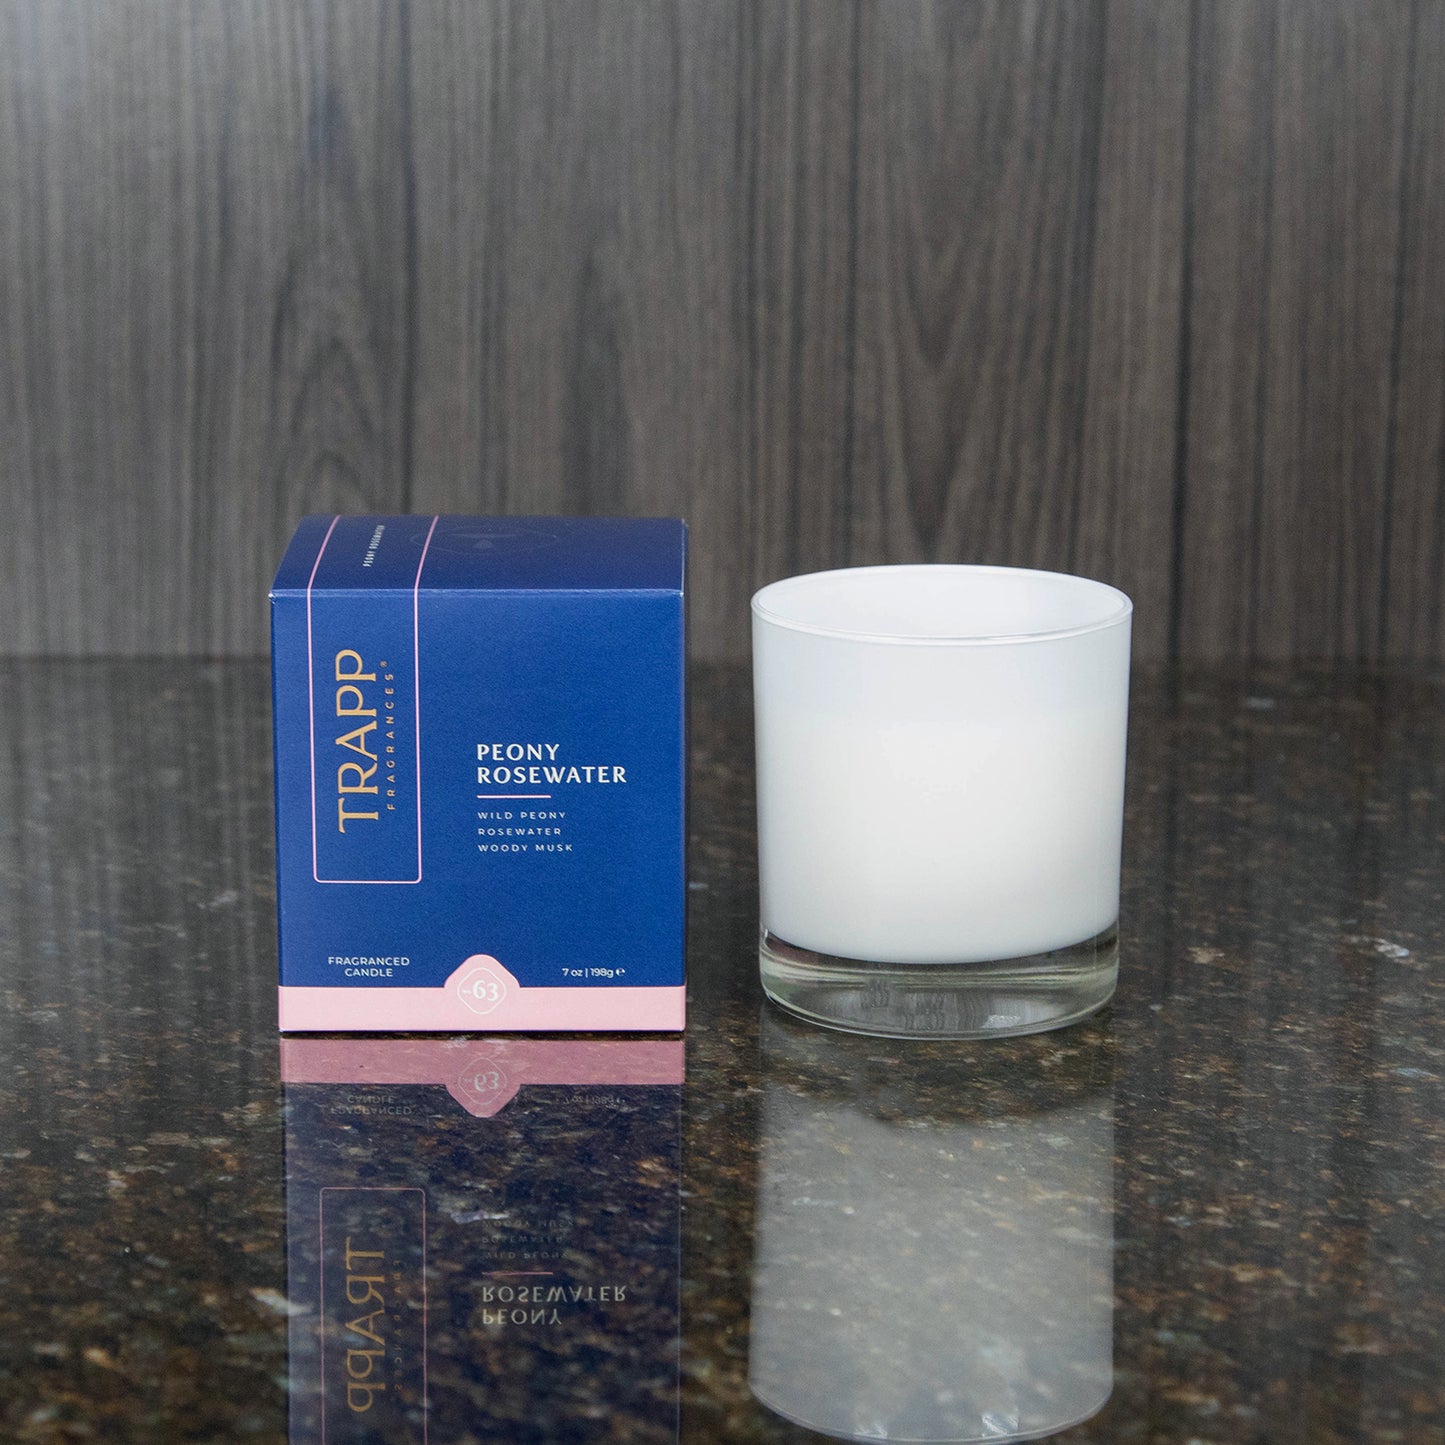 a white candle votive next to the "Peony Rosewater" box